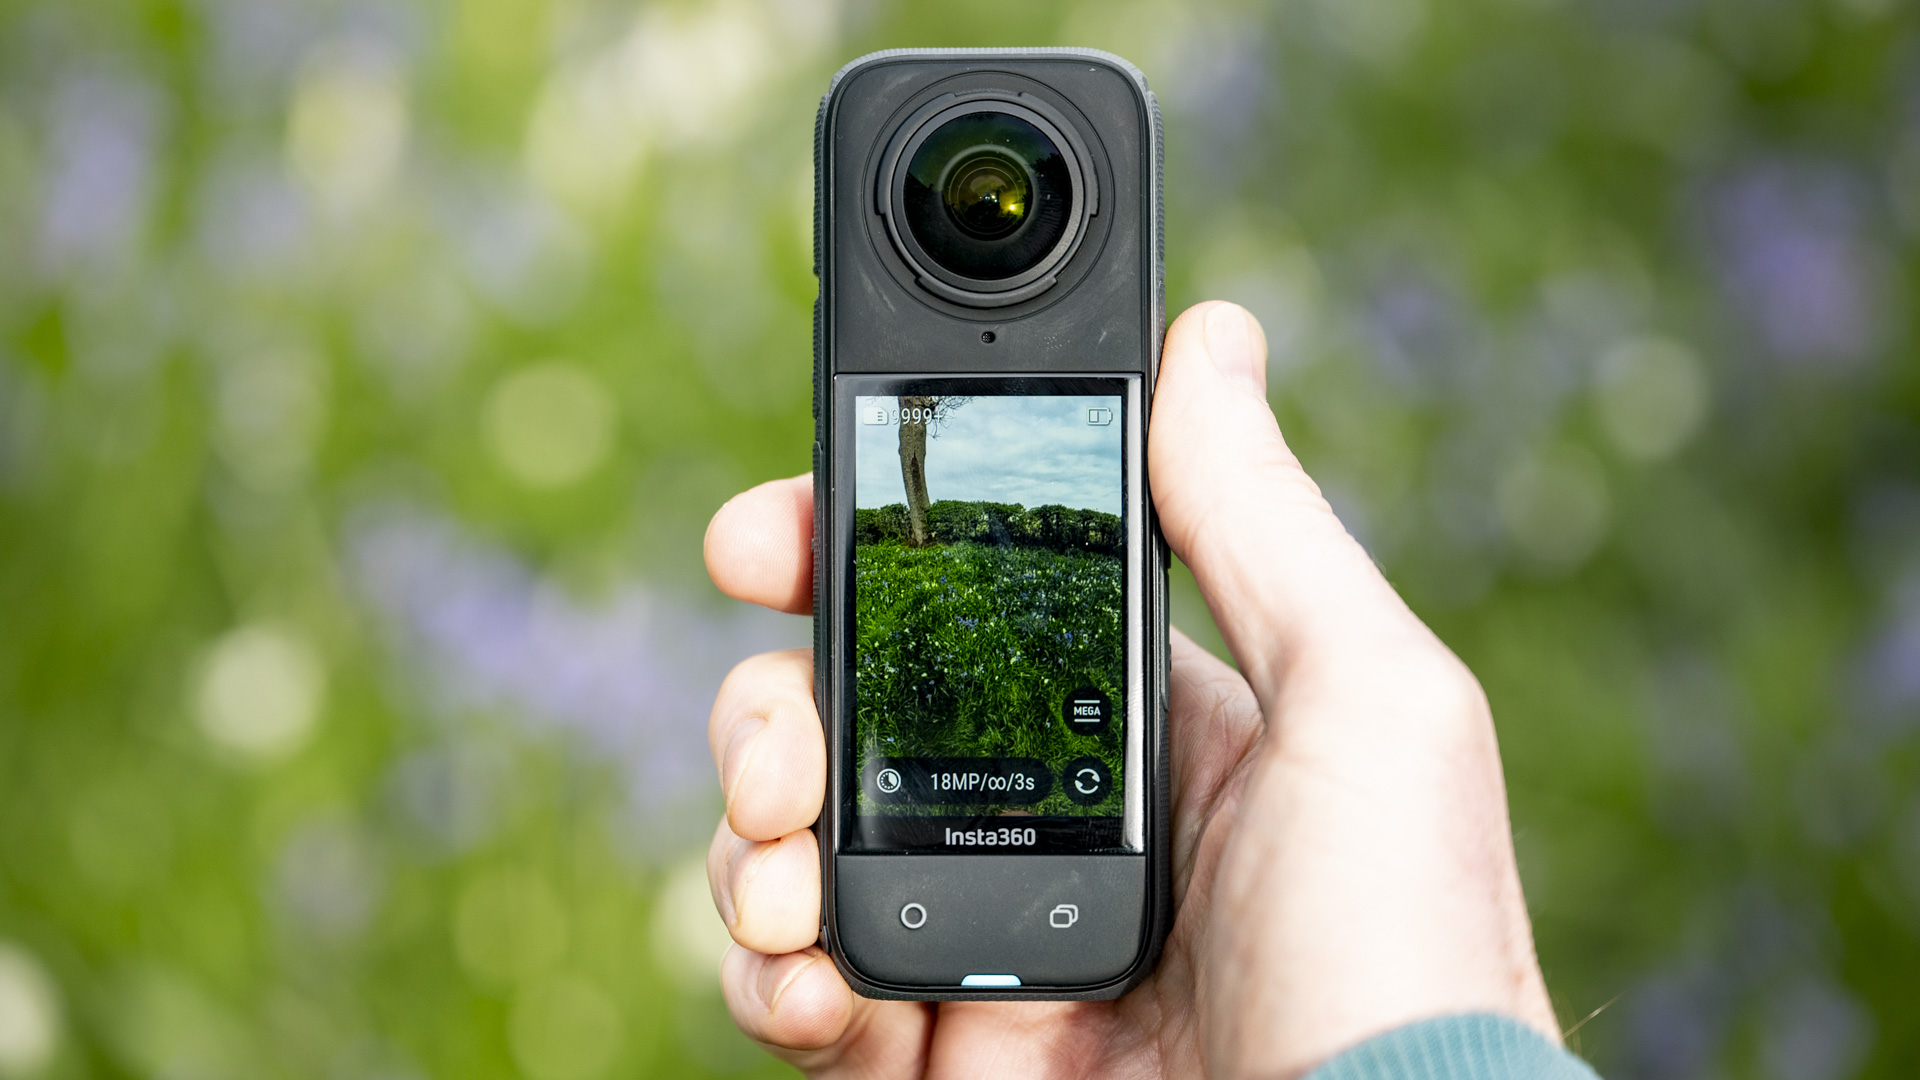 Insta360 X4 360 degree camera screen outdoors with vibrant grassy background